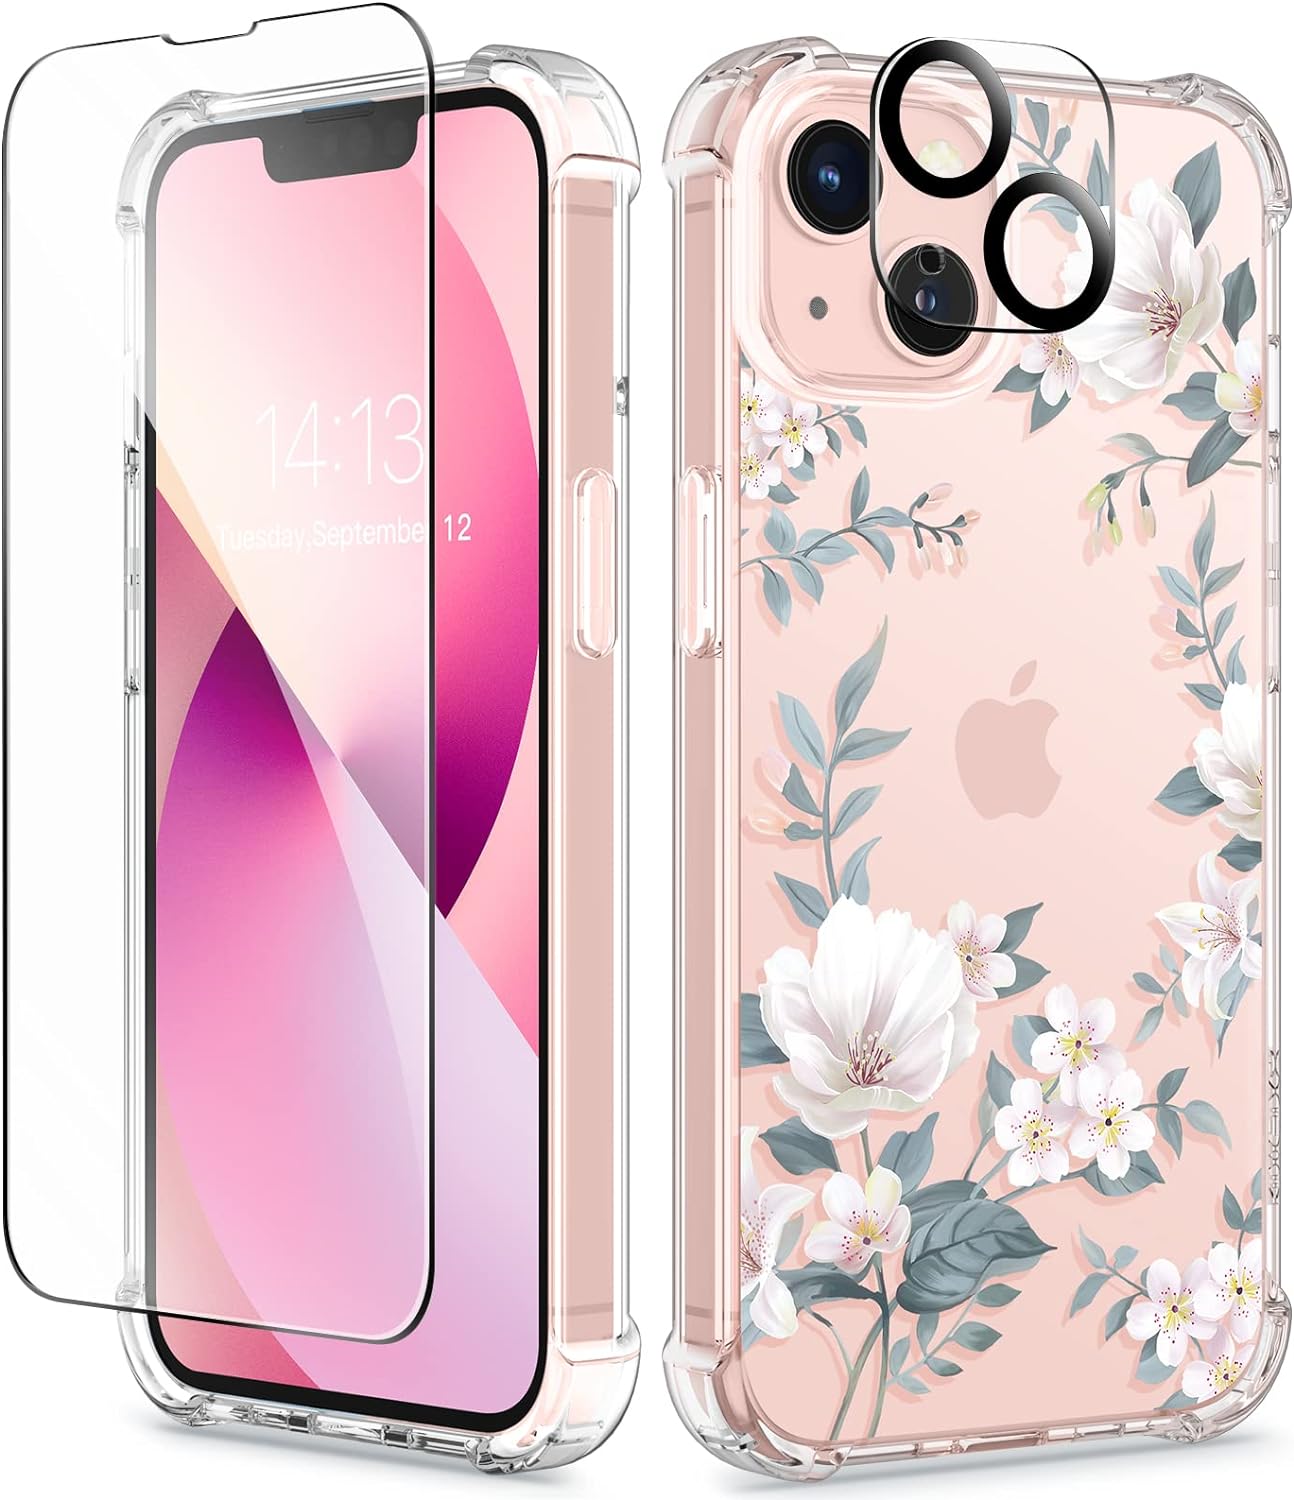 GVIEWIN Designed for iPhone 13 Case 6.1 Inch, with Tempered Glass Screen Protector + Camera Lens Protector Clear Flower Soft & Flexible Shockproof Floral Women Phone CoverMagnolia/White